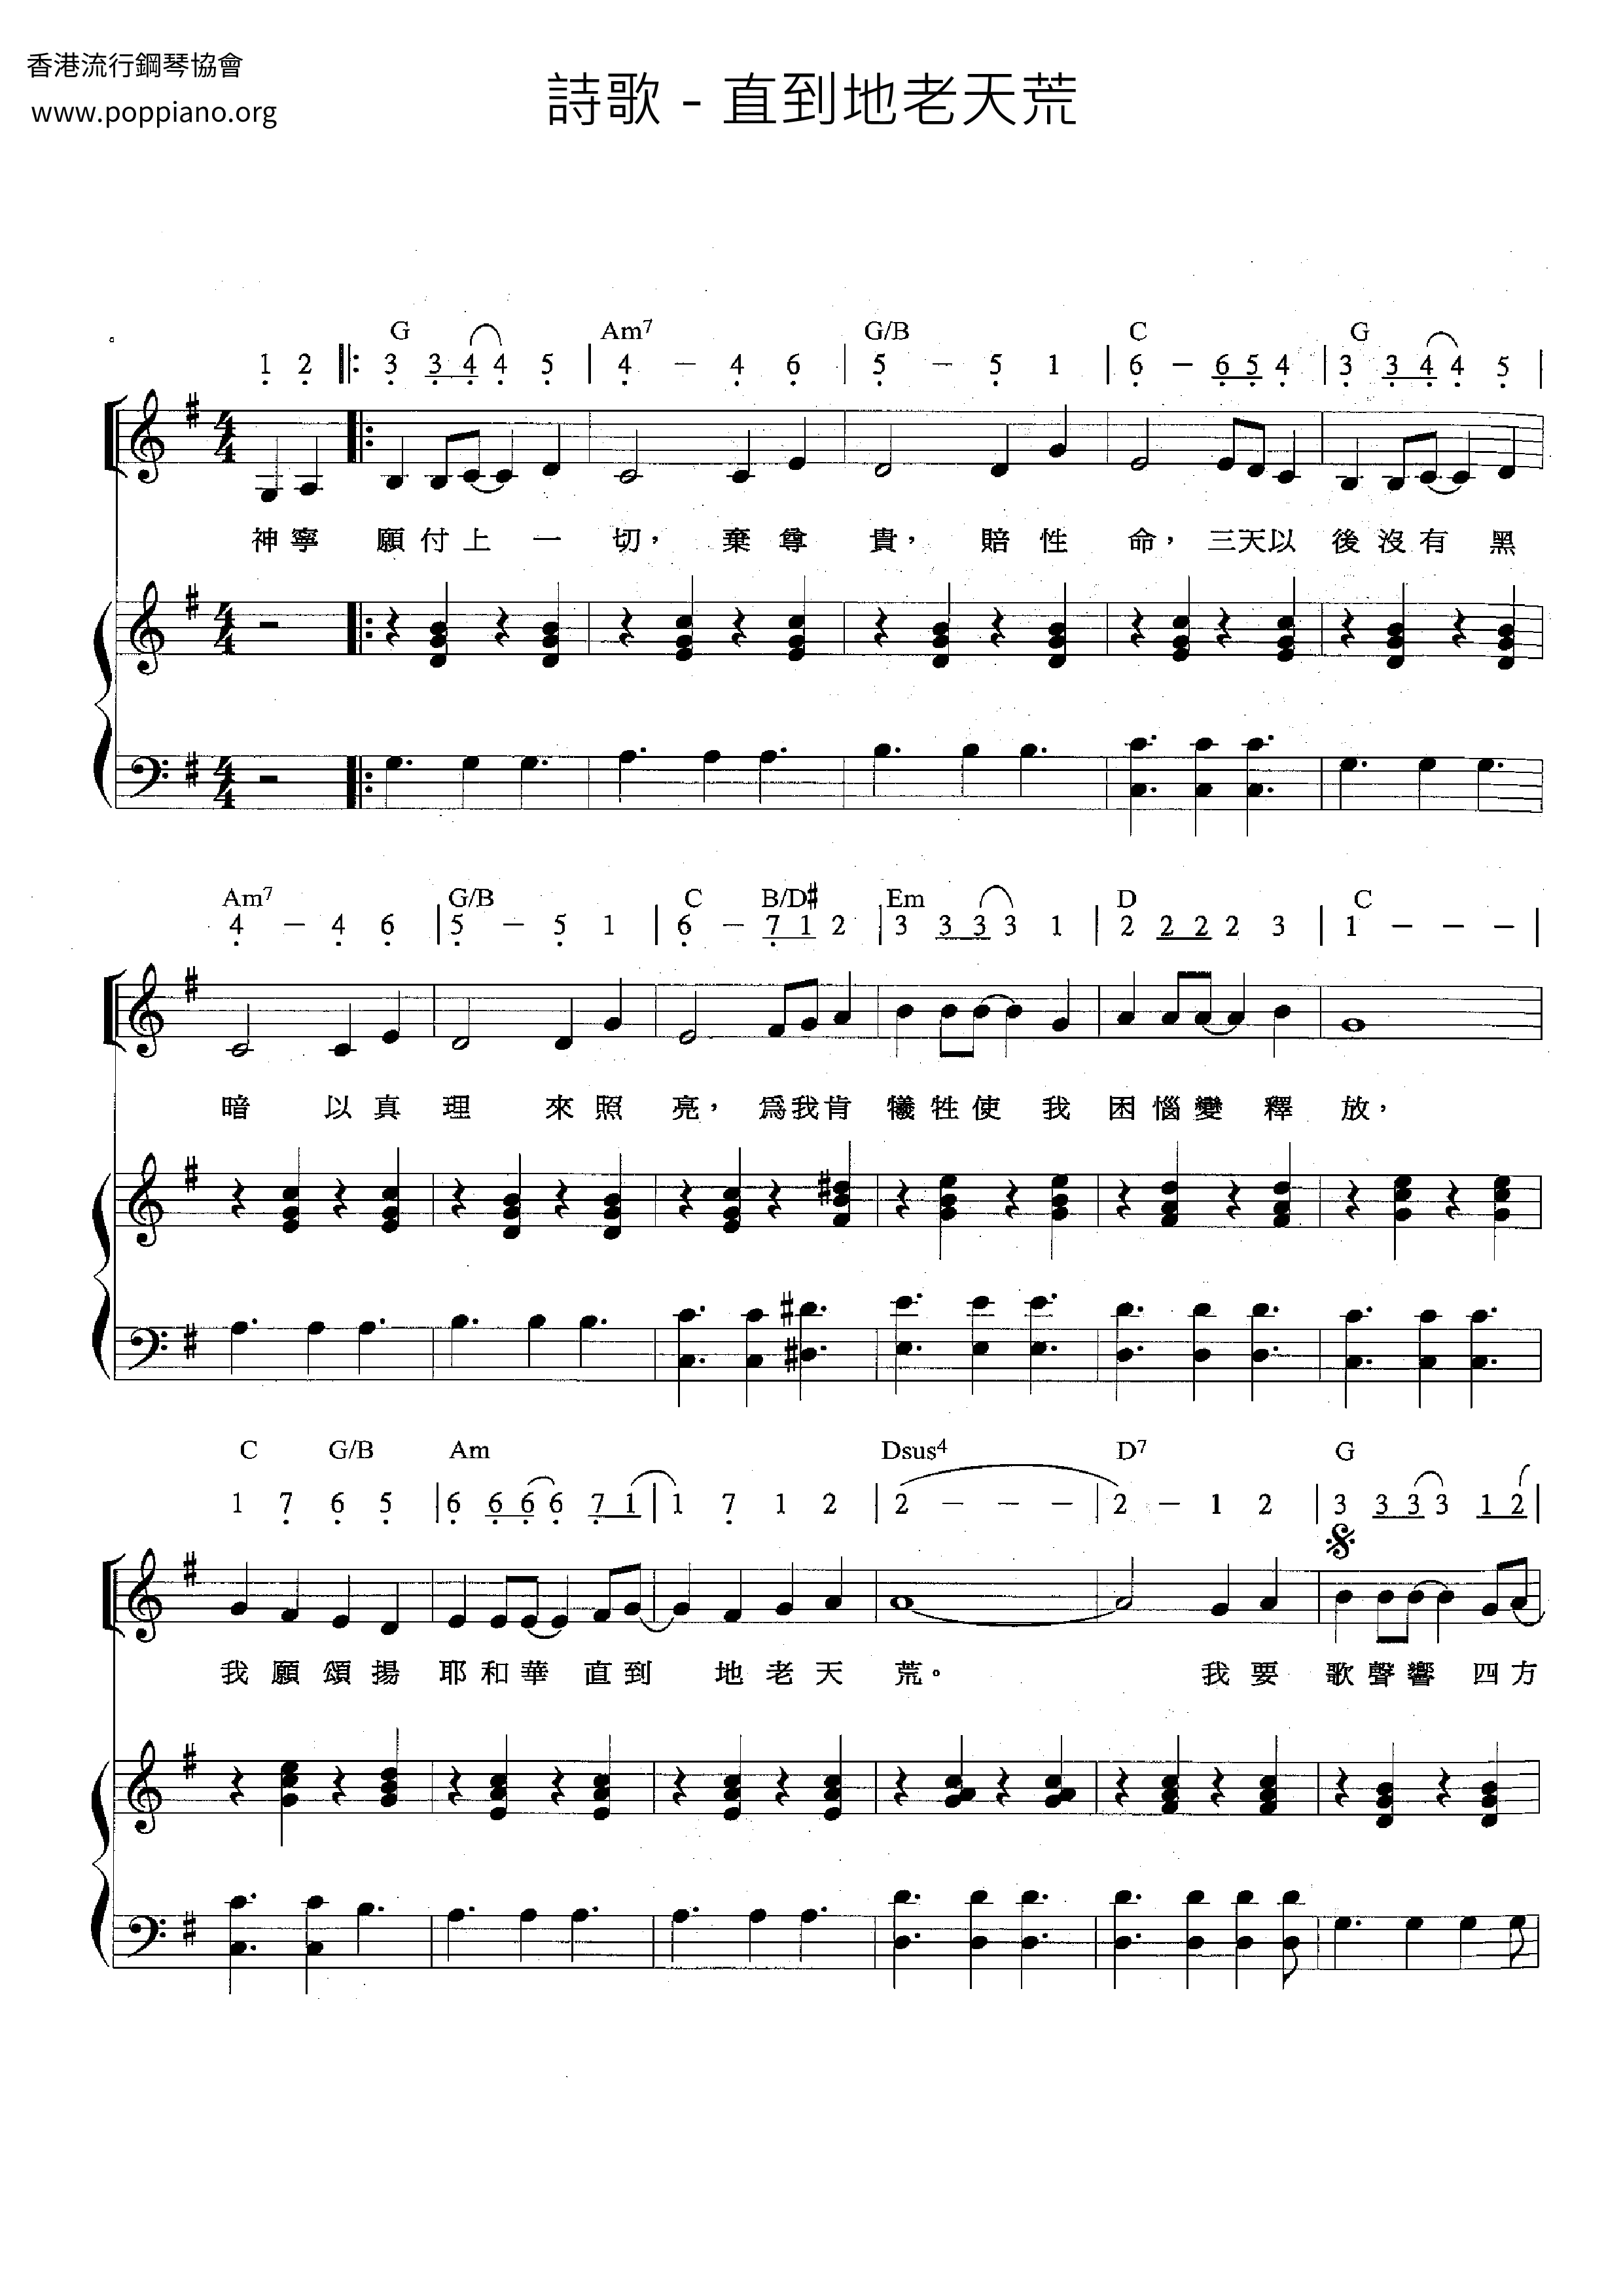 Find The Love That Was In The Beginning Score